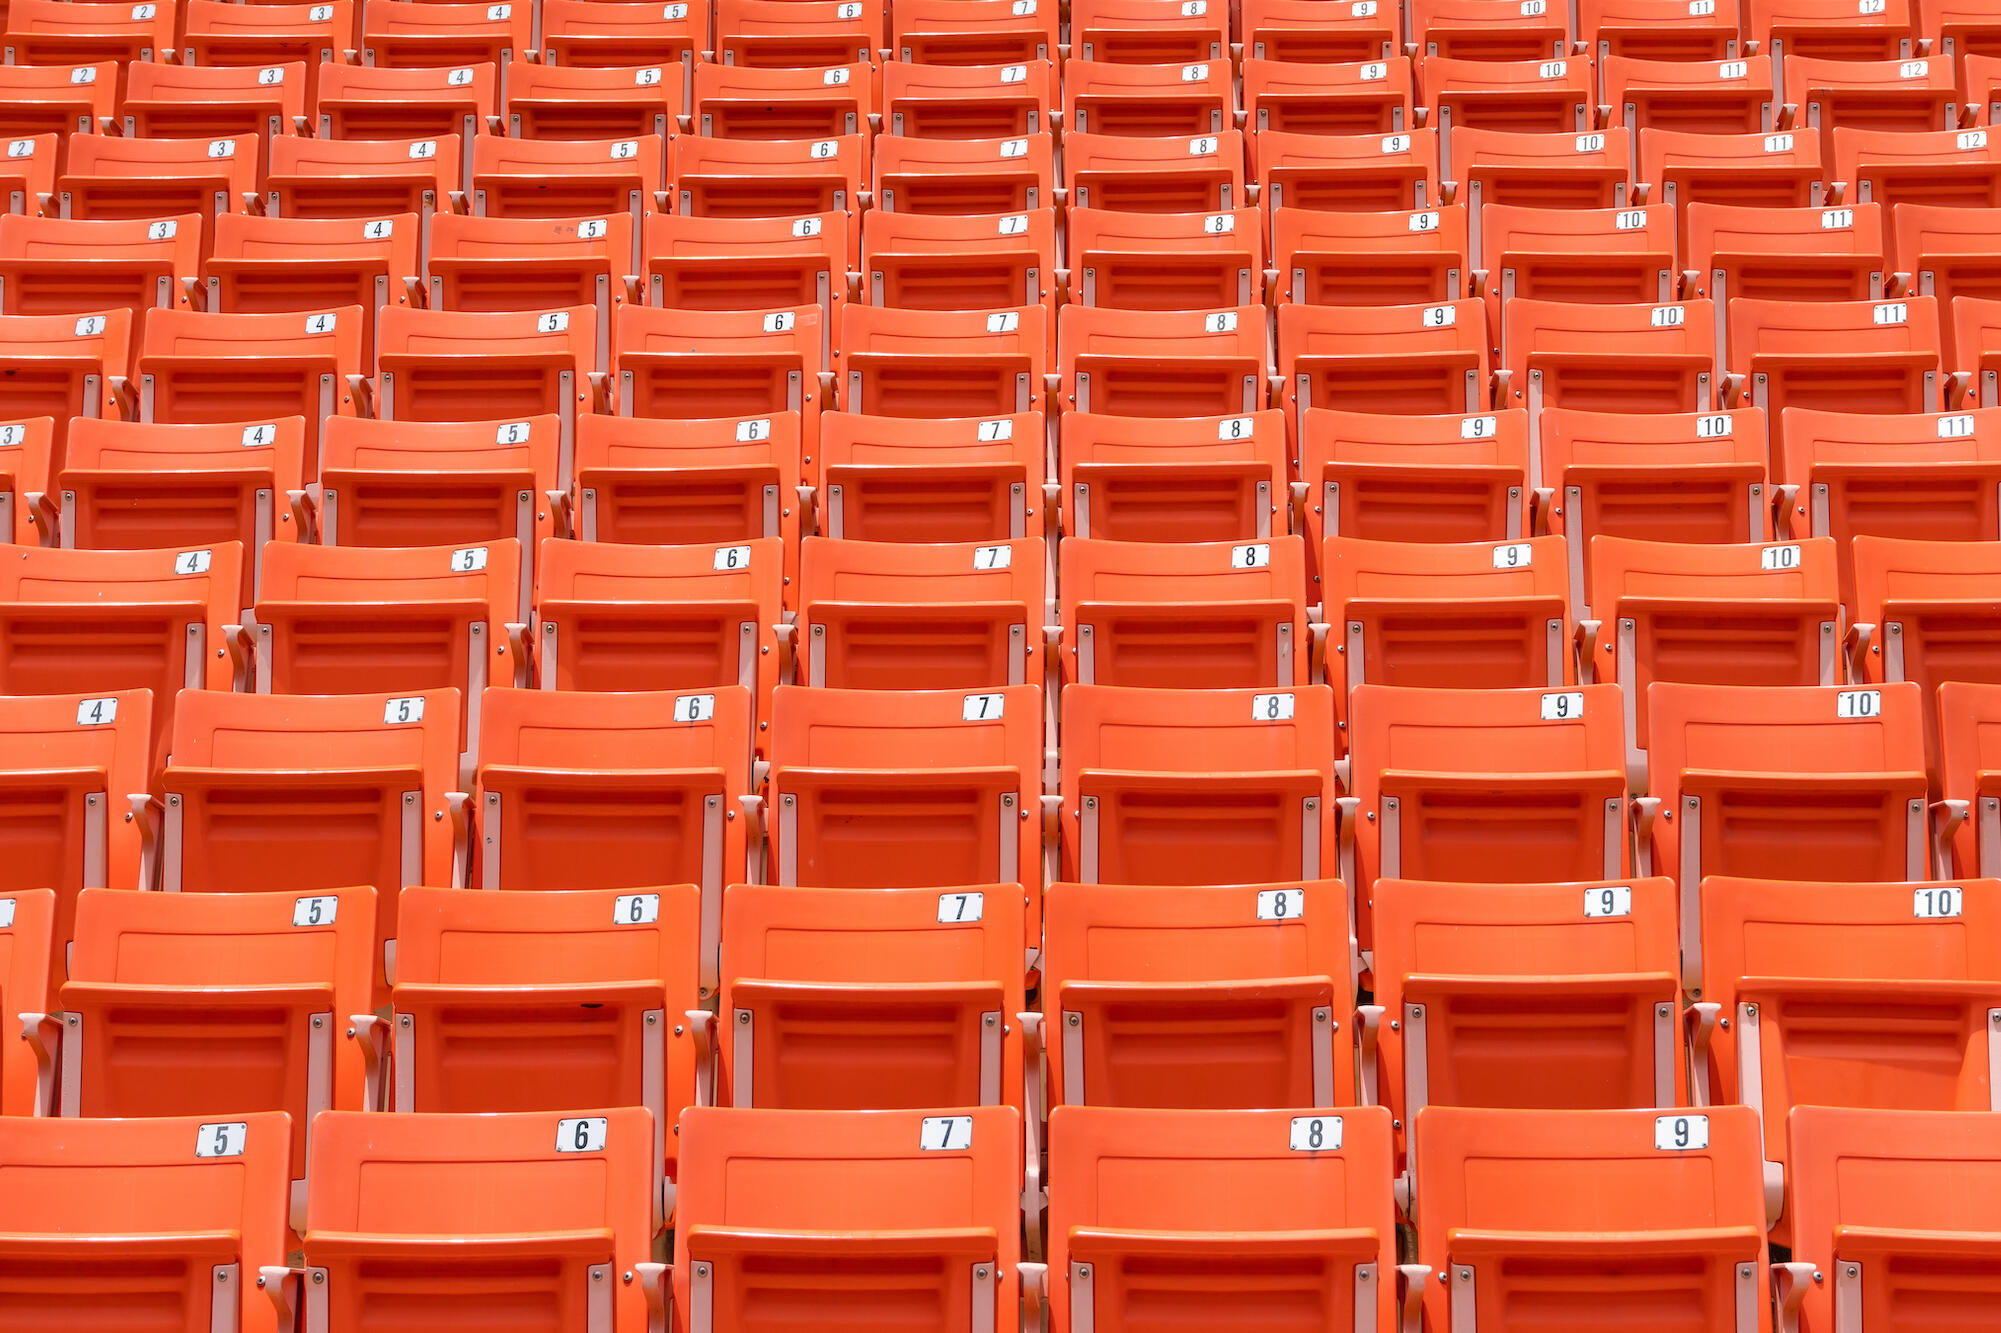 empty seats in a sporting arena